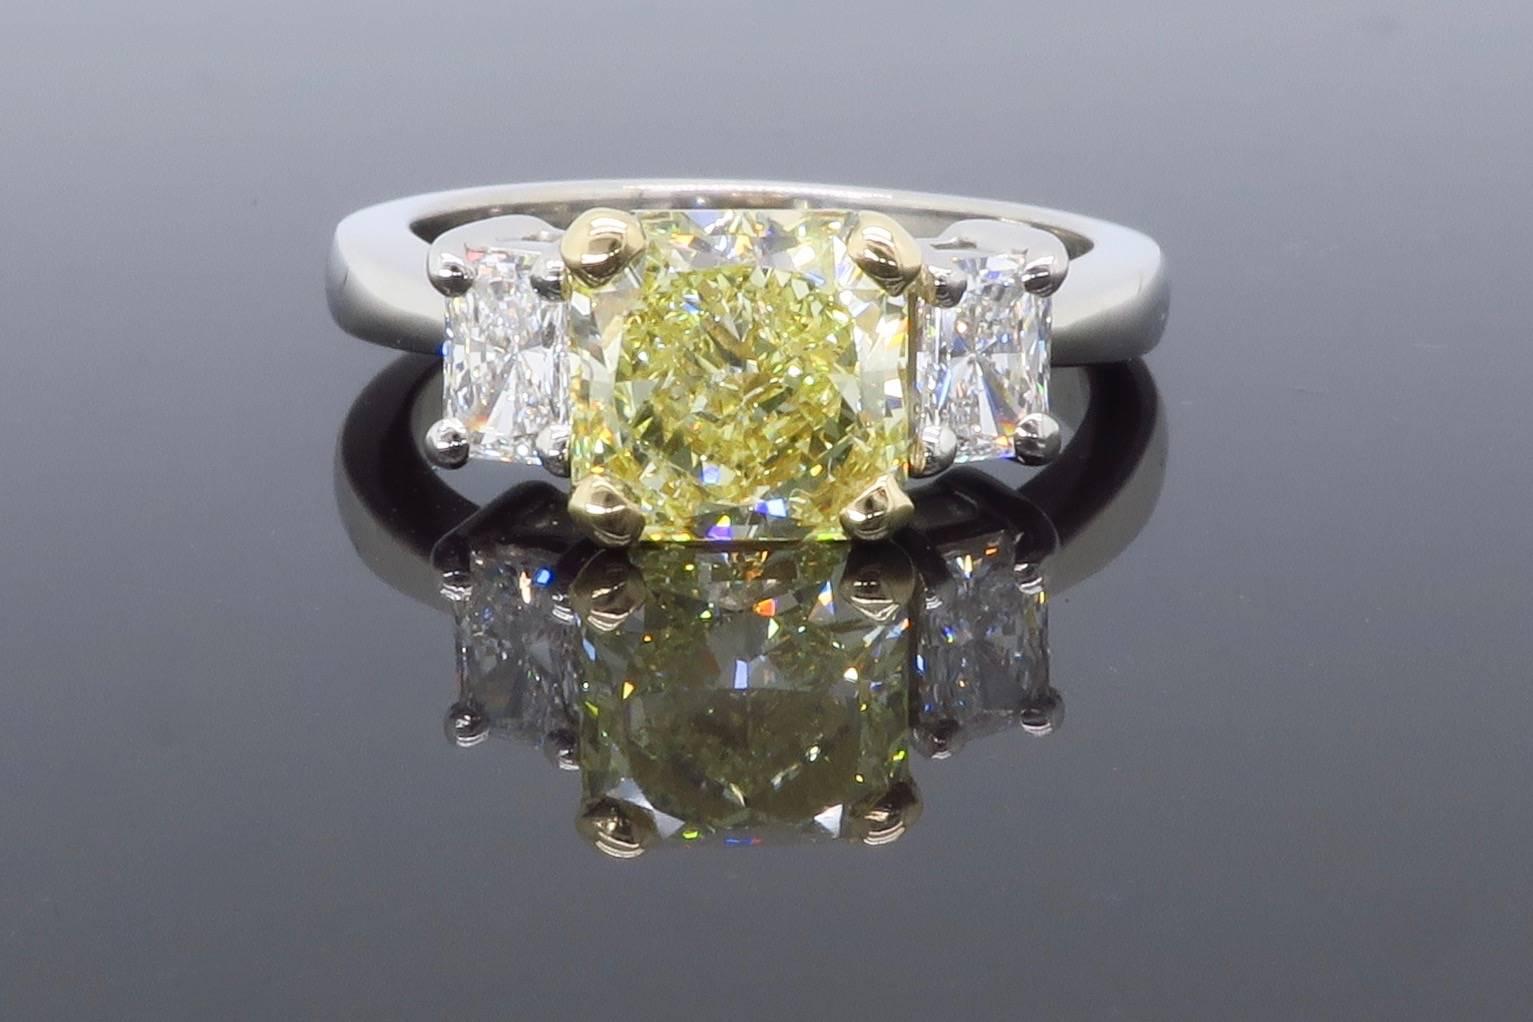 Platinum Three Stone diamond ring with a GIA Certified Radiant cut 2.08CT Fancy Yellow Diamond in the center with an impressive VVS1 clarity. There are two additional Radiant cut diamonds accenting the center stone weighing approximately .30ct each,